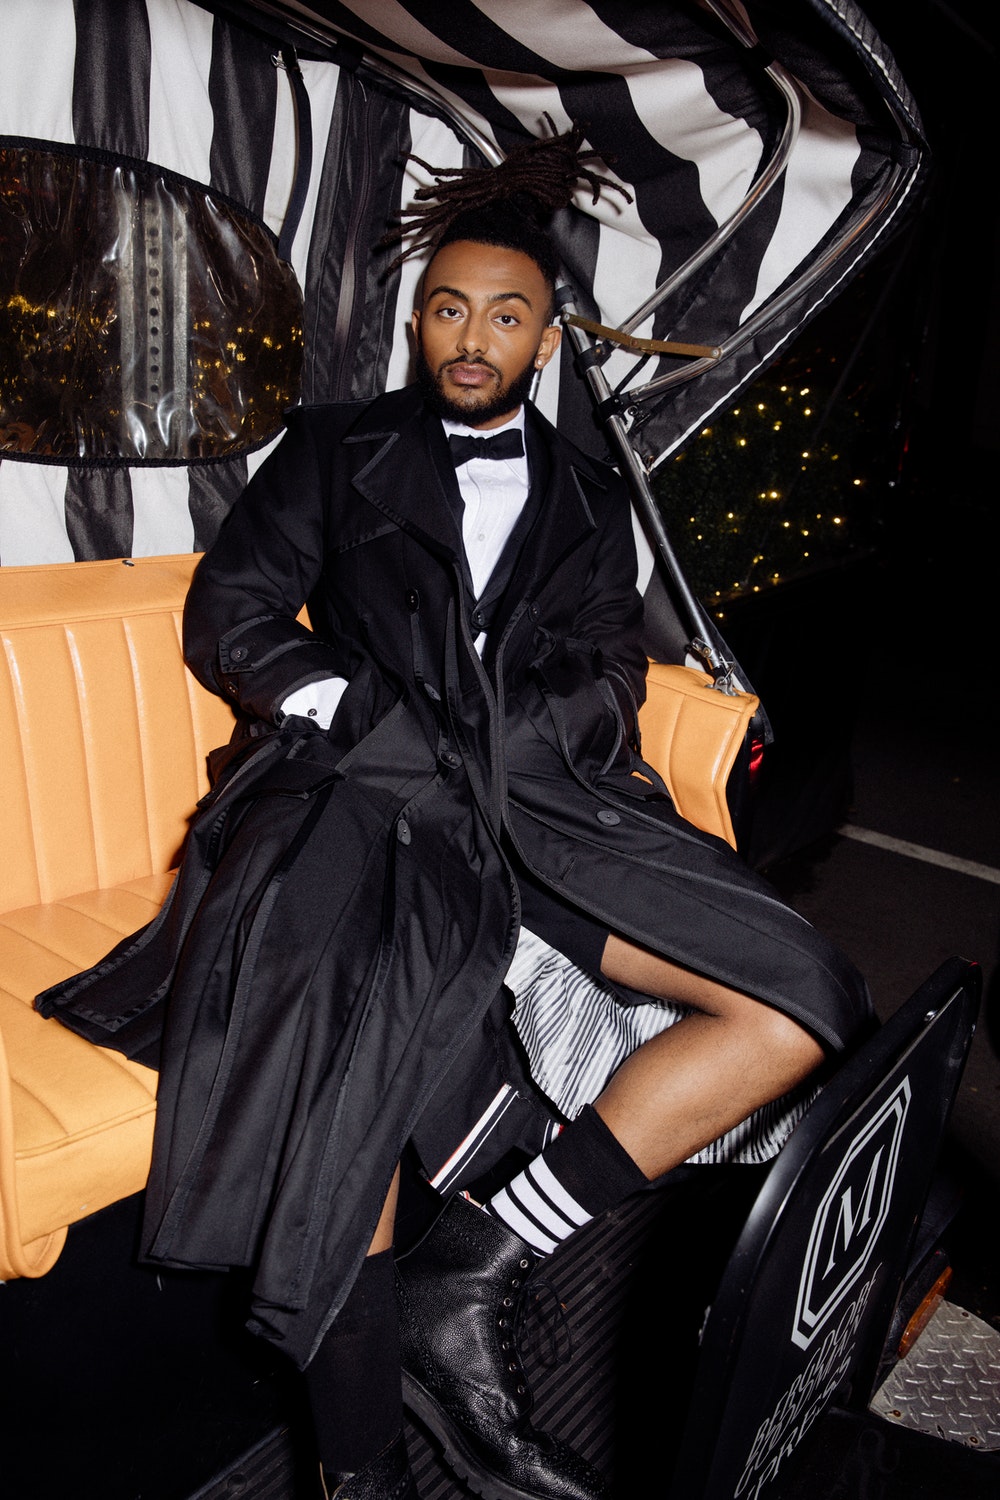 L'OFFICIEL Exclusive: Aminé Talks 'Twopointfive' and Thom Browne Ahead of the CFDA Awards